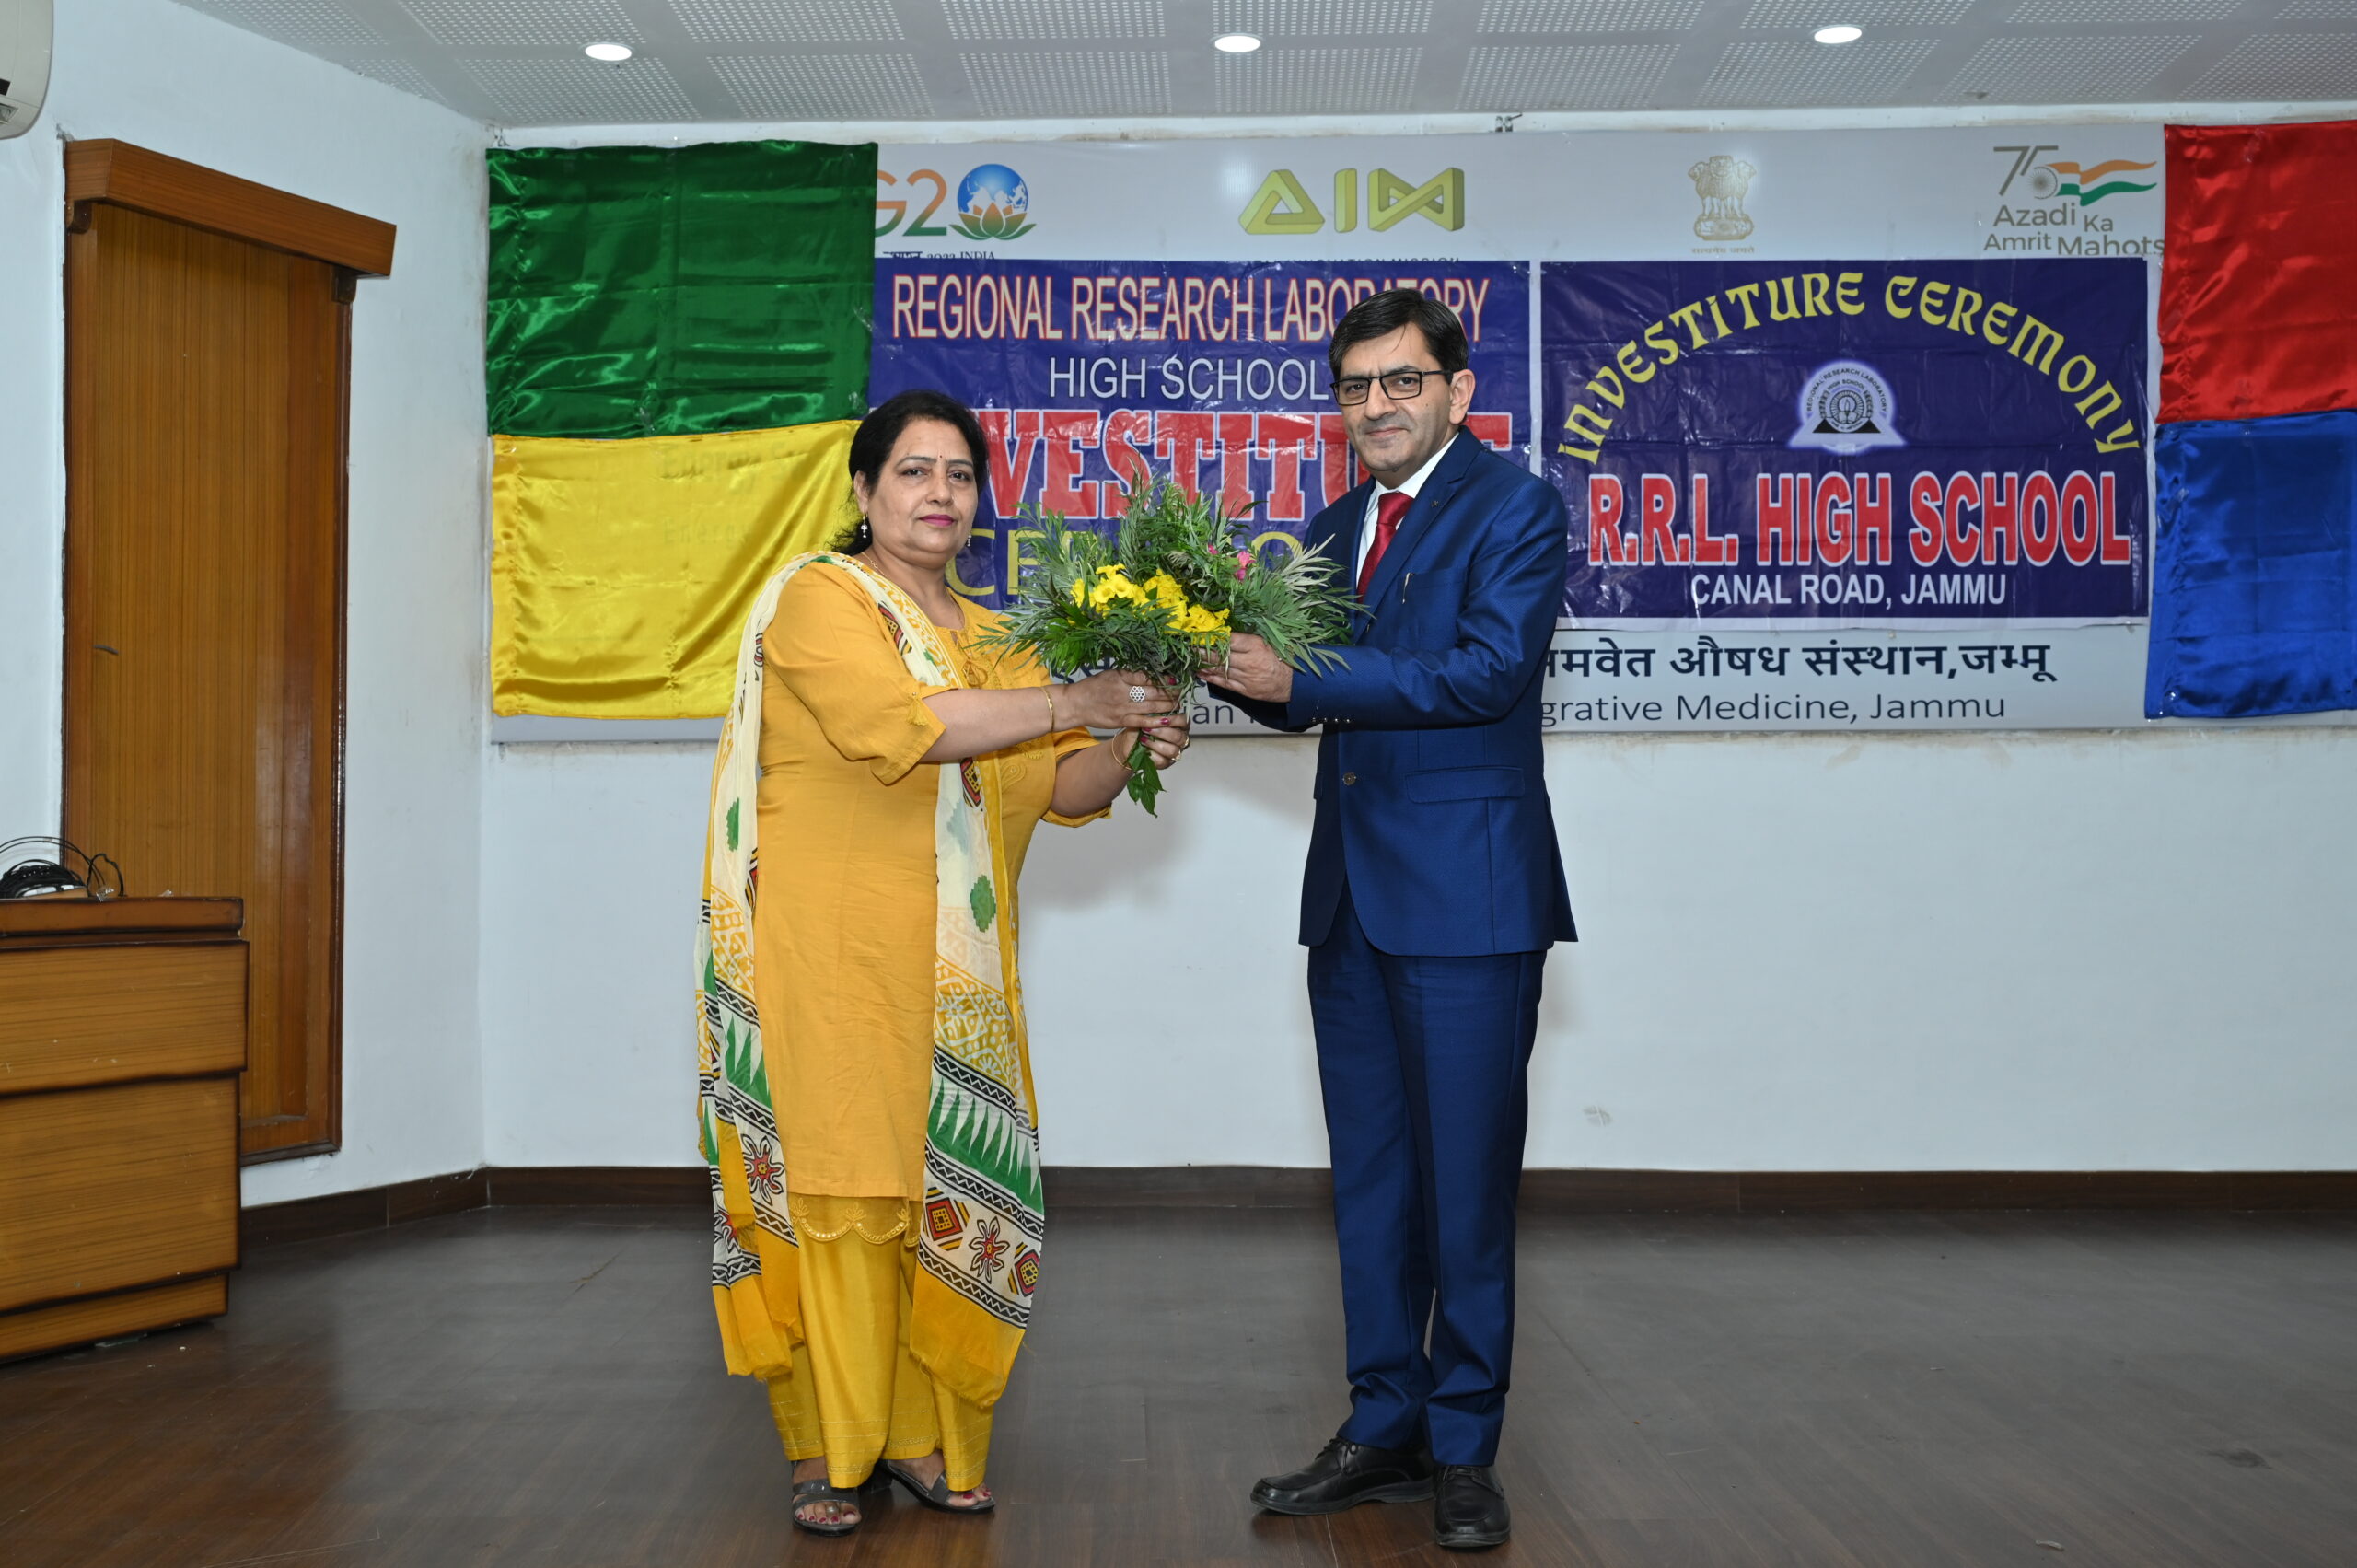 Annual Investiture Ceremony of Regional Research Laboratory High School, Canal Road Jammu for the Academic session 2023-24.